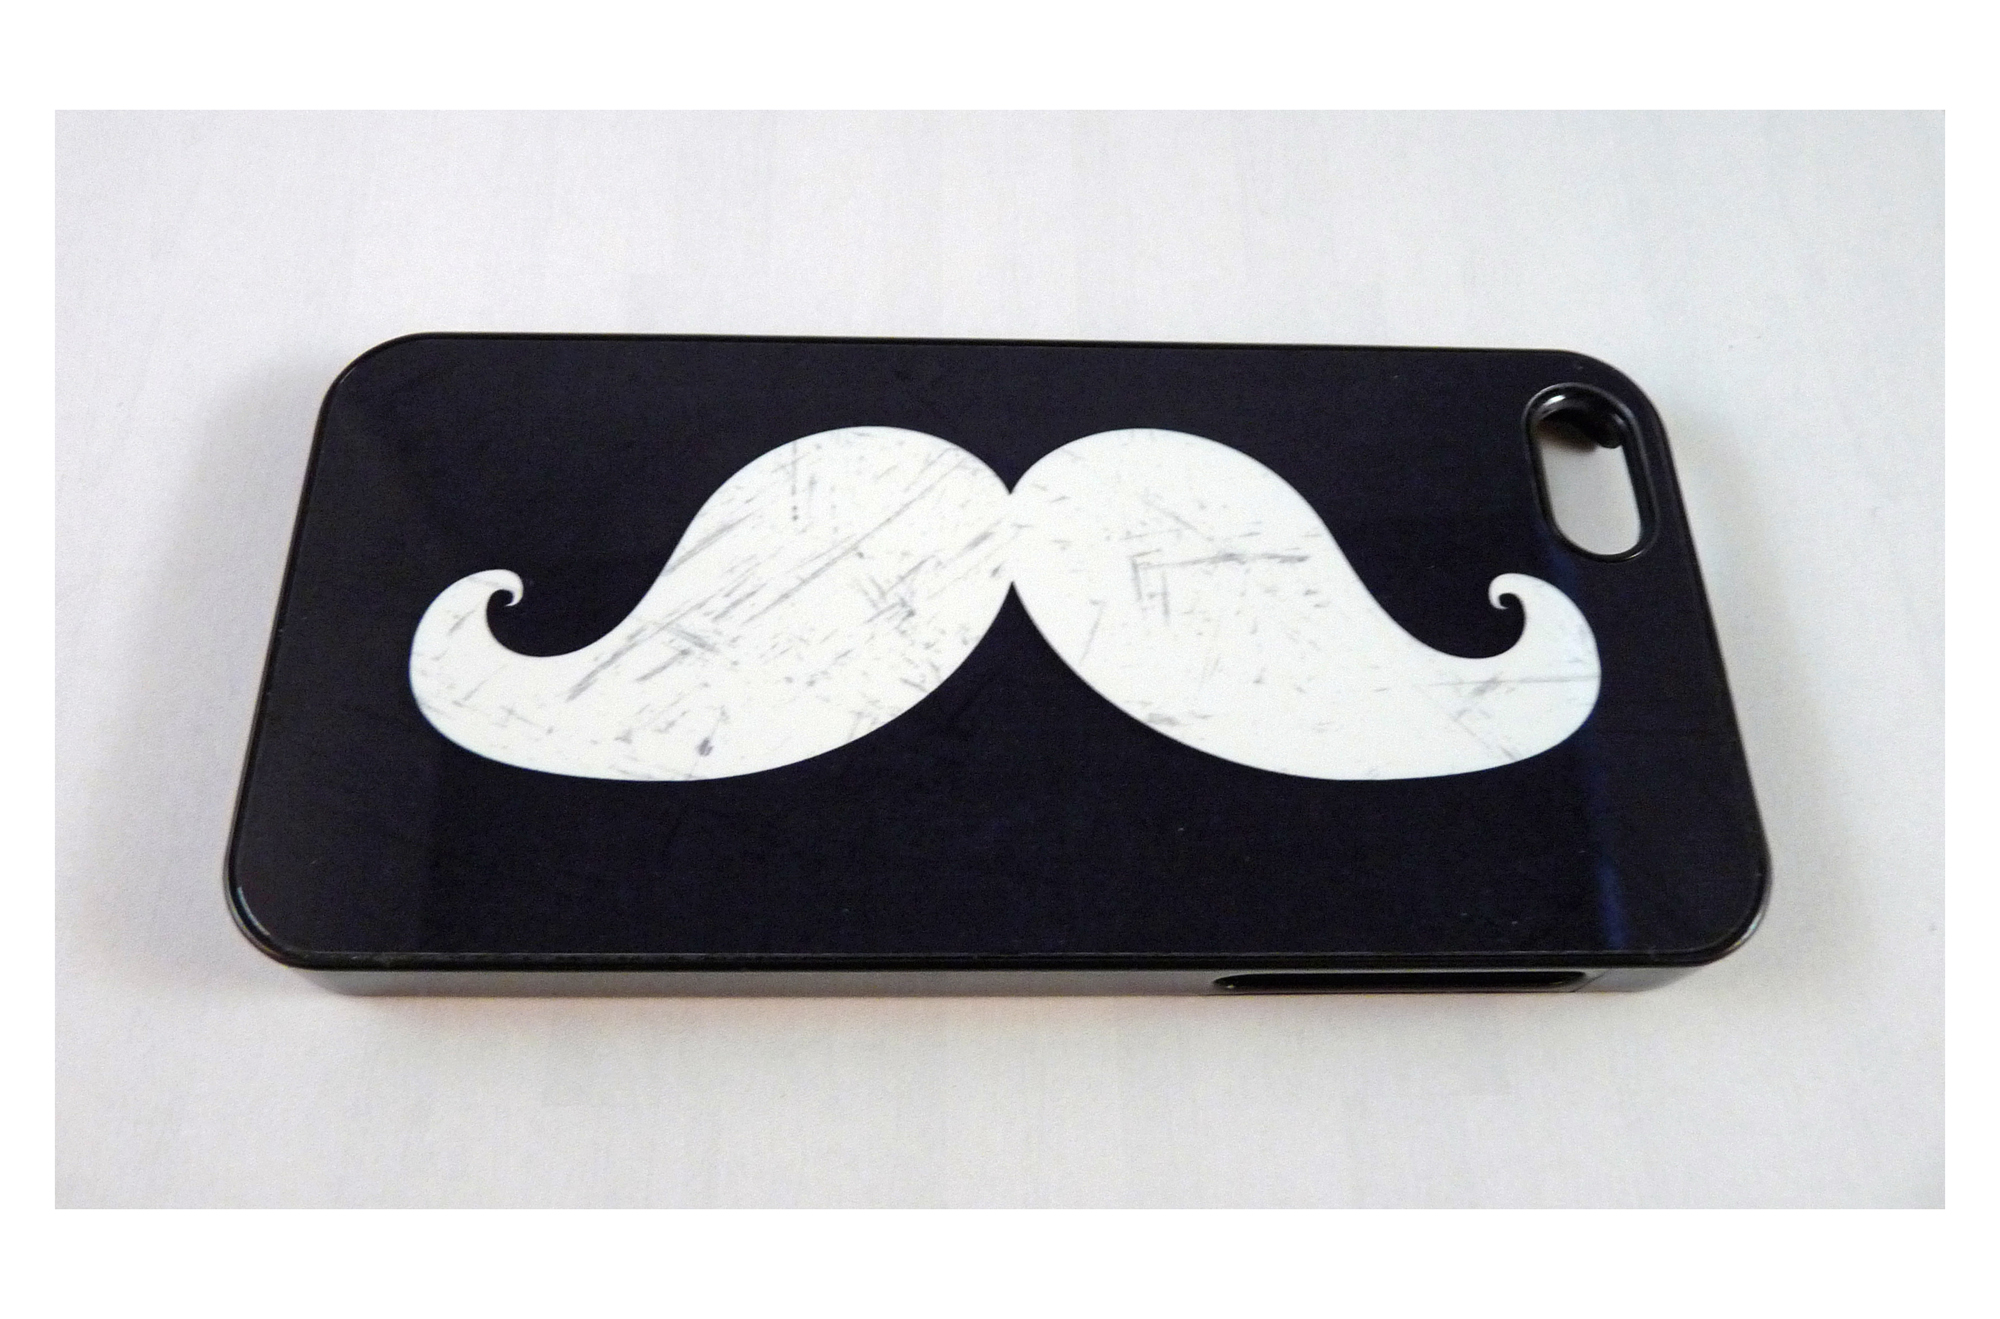 I Mustache You A Question made with sublimation printing